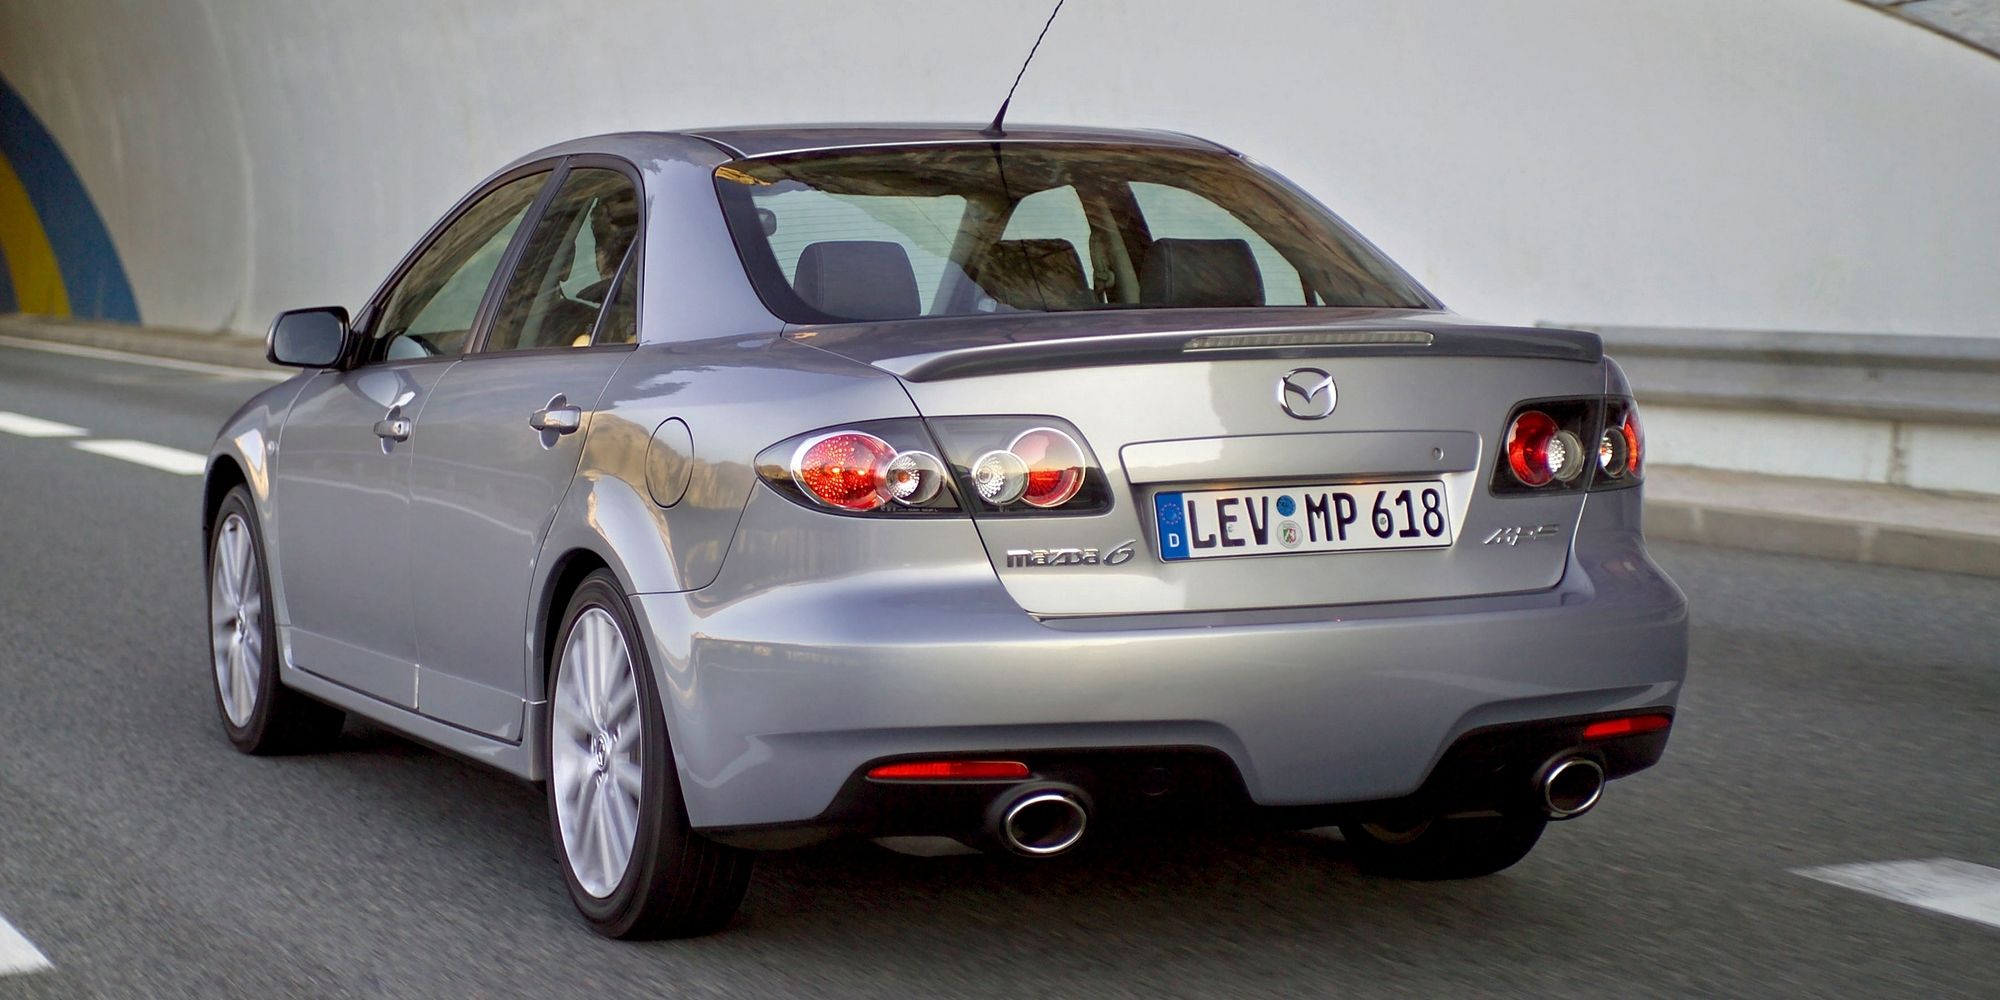 The rear of the Mazdaspeed6